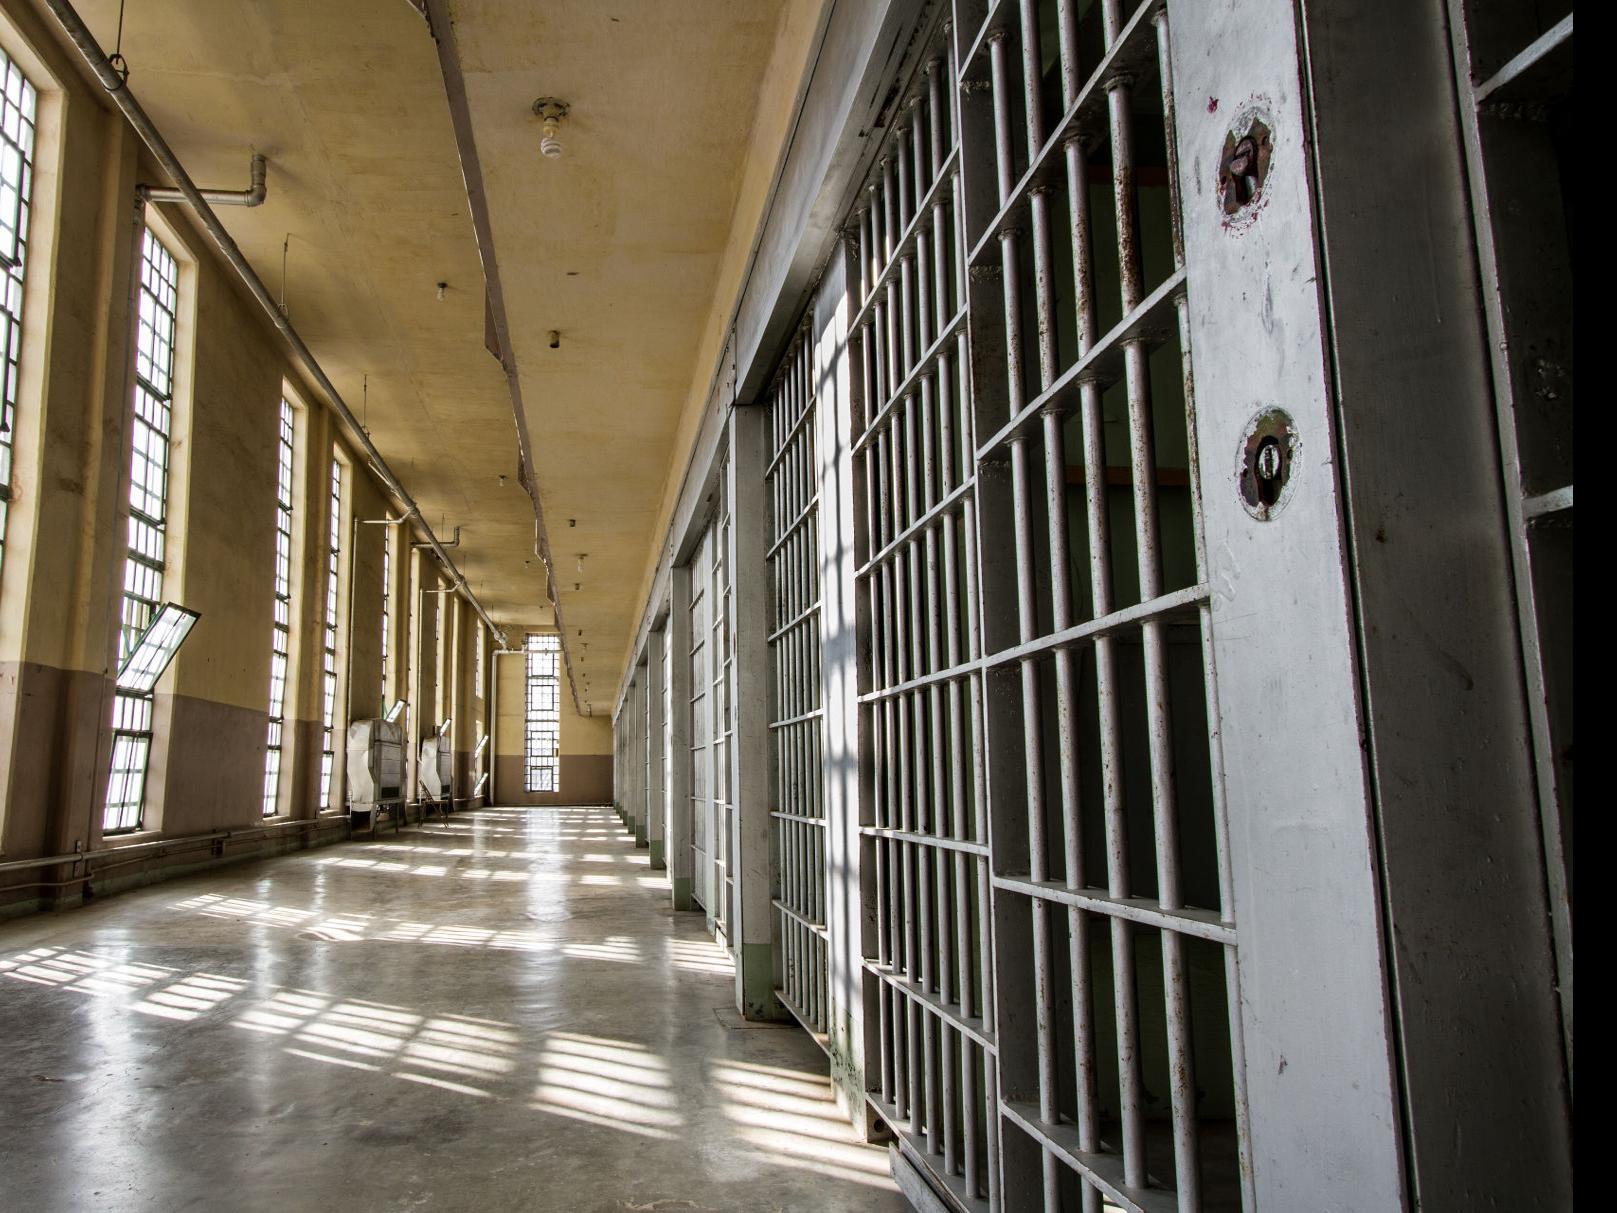 Washington Co. Offsets Costs Through Daily Jail Fee